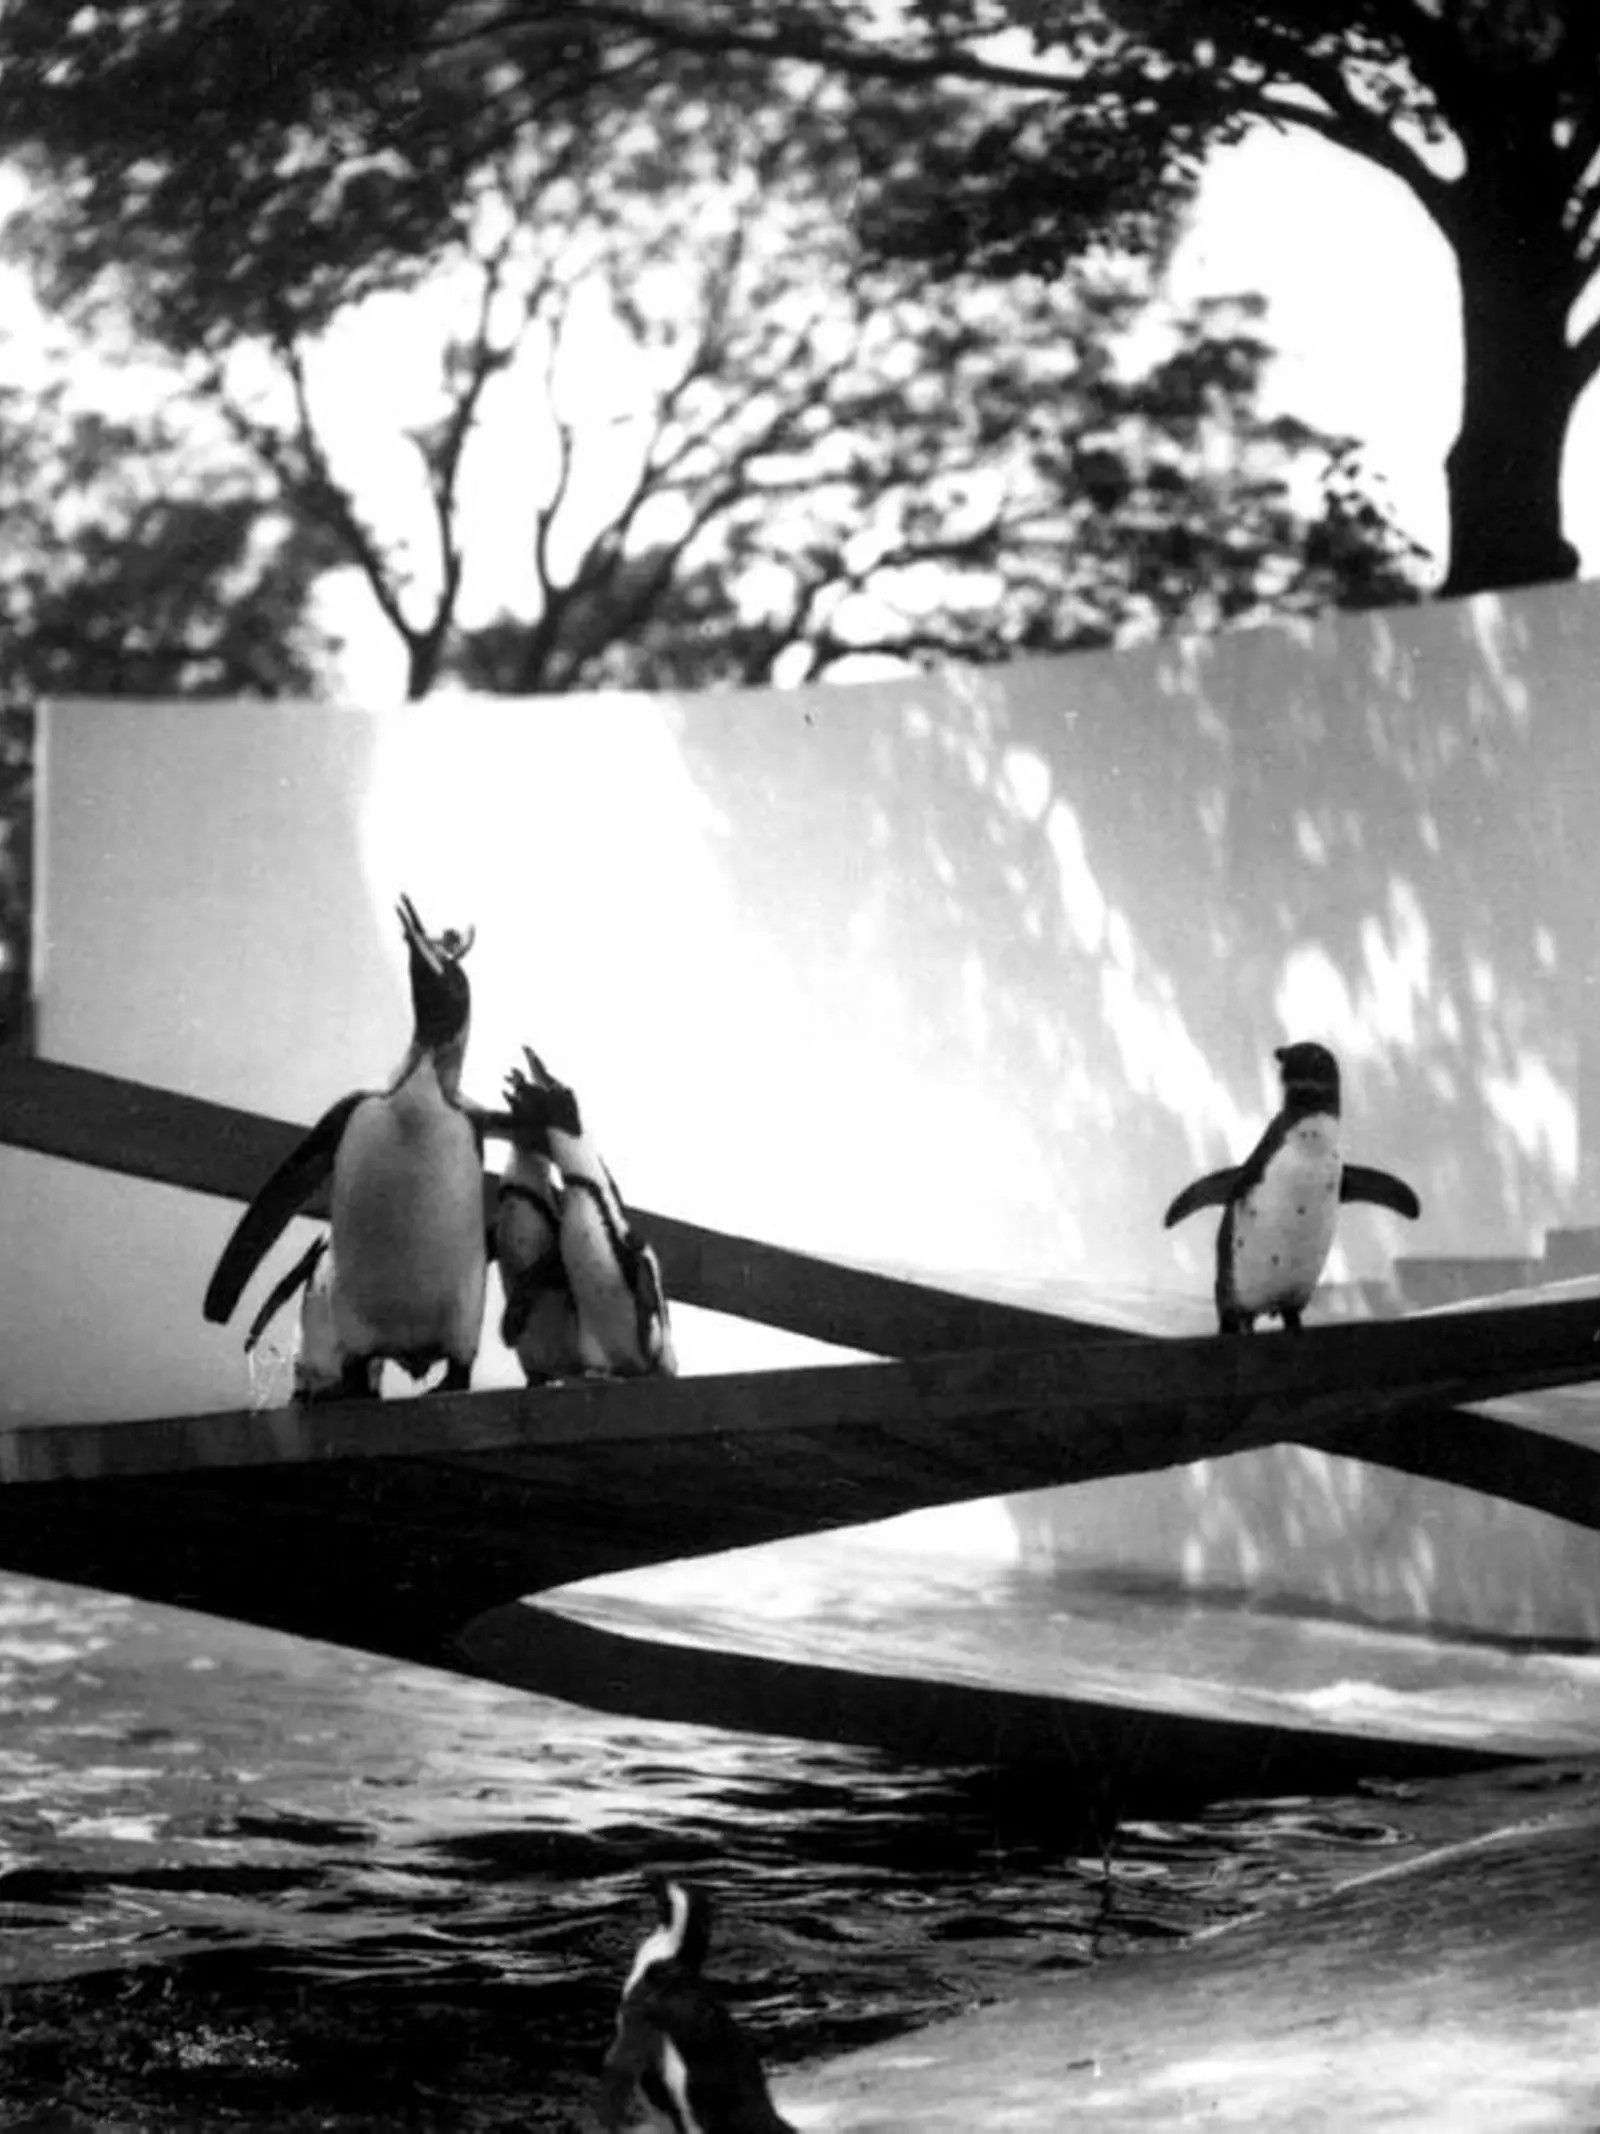 Penguins on ramp at Lubetkin penguin pool at London Zoo designed by Berthold Lubetkin